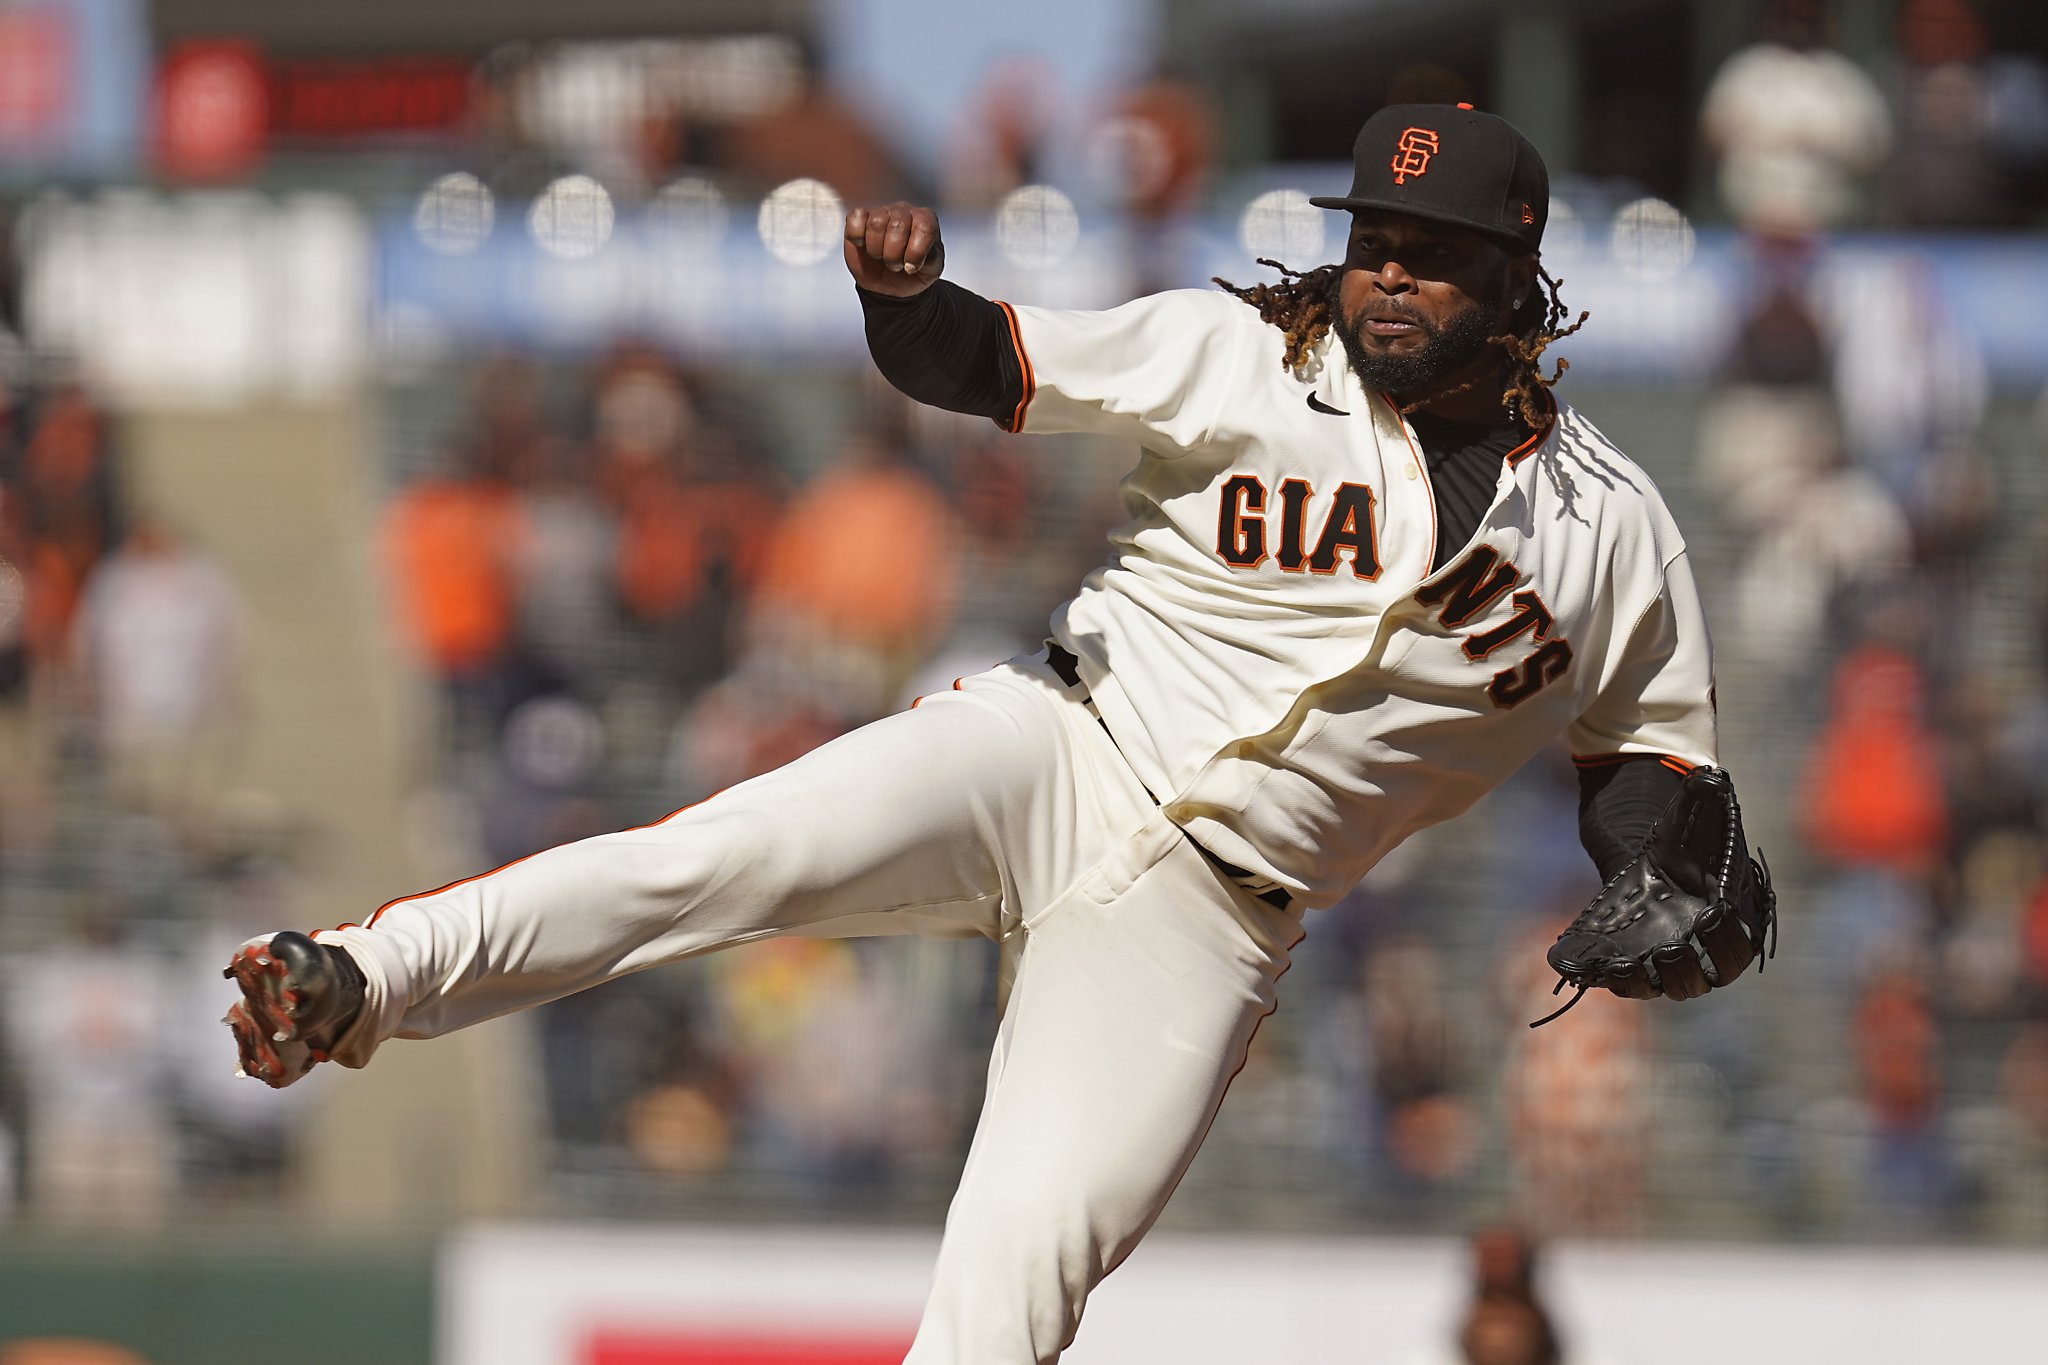 Giants' Johnny Cueto loses no-hitter as routine fly ball ends in